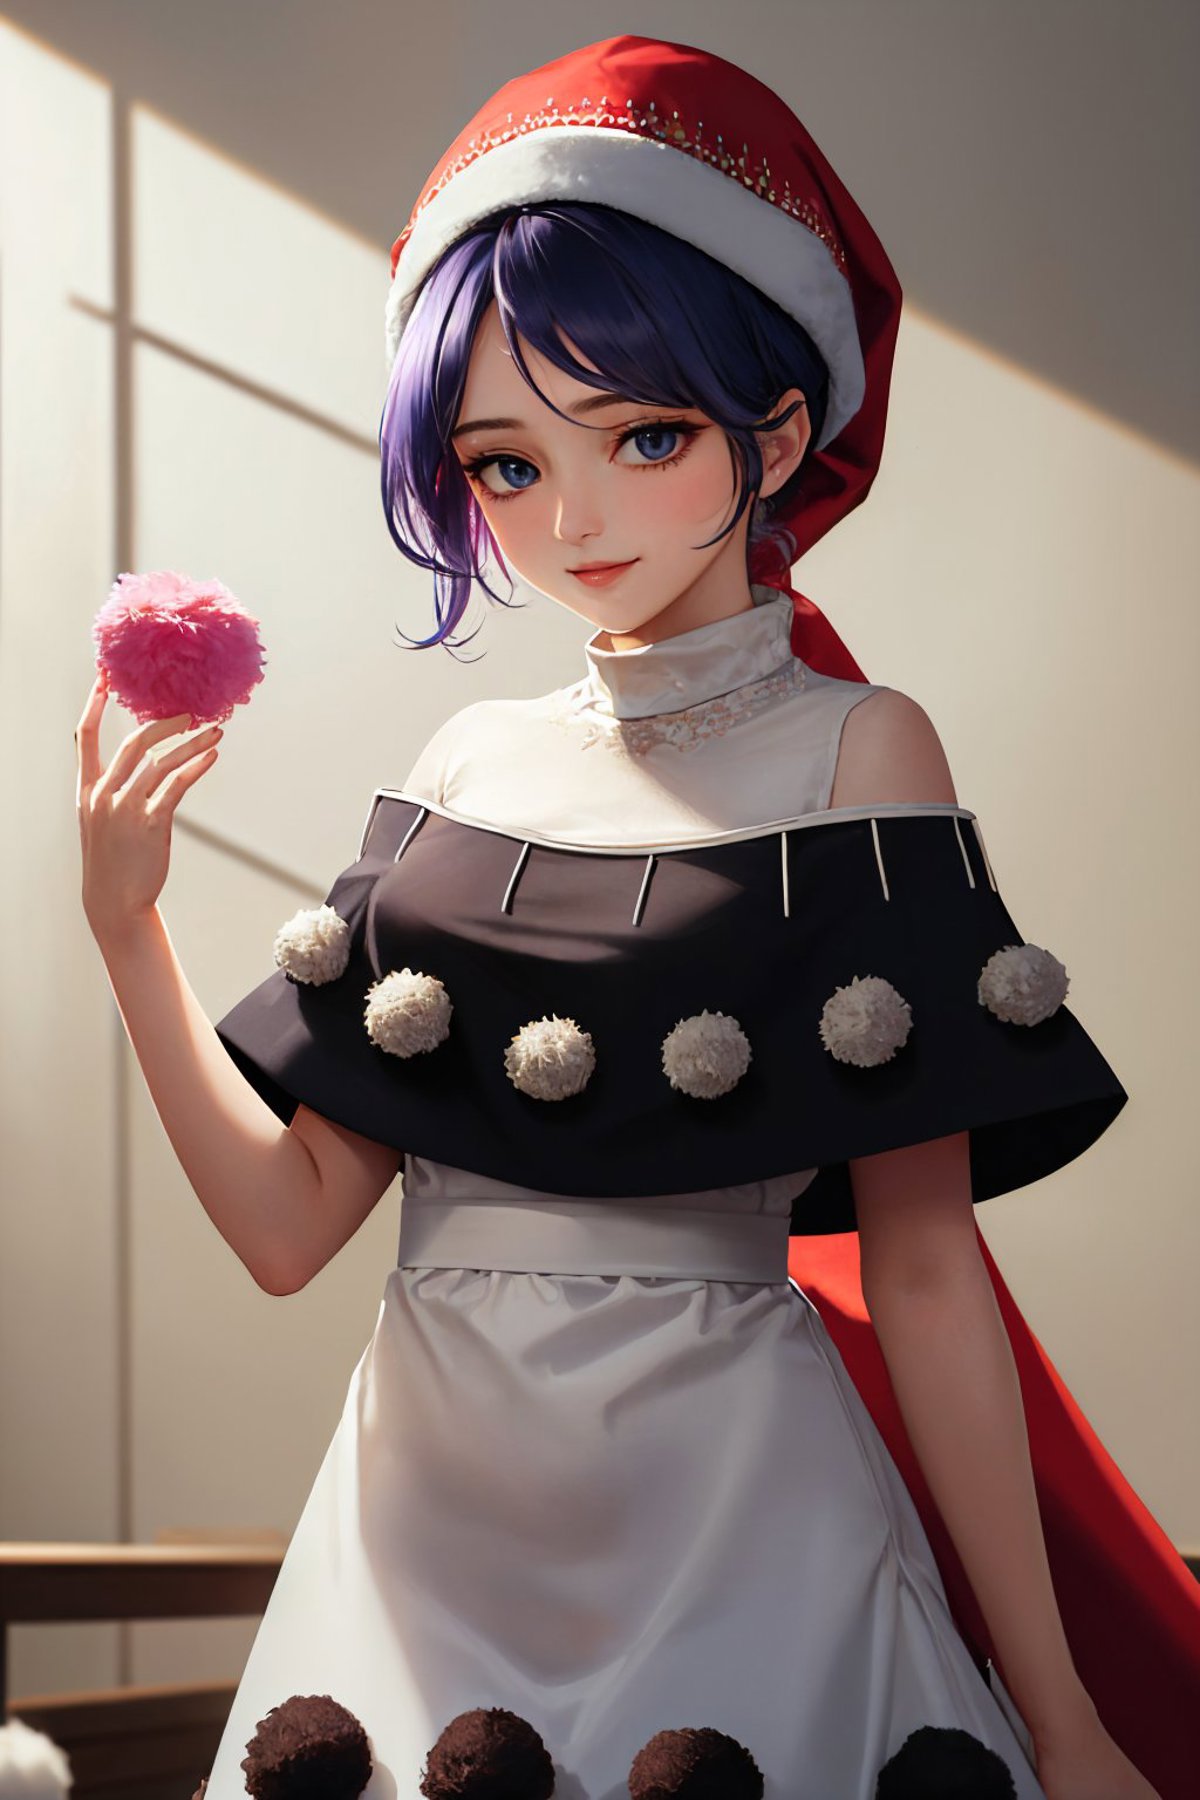 Doremy Sweet | Touhou image by justTNP